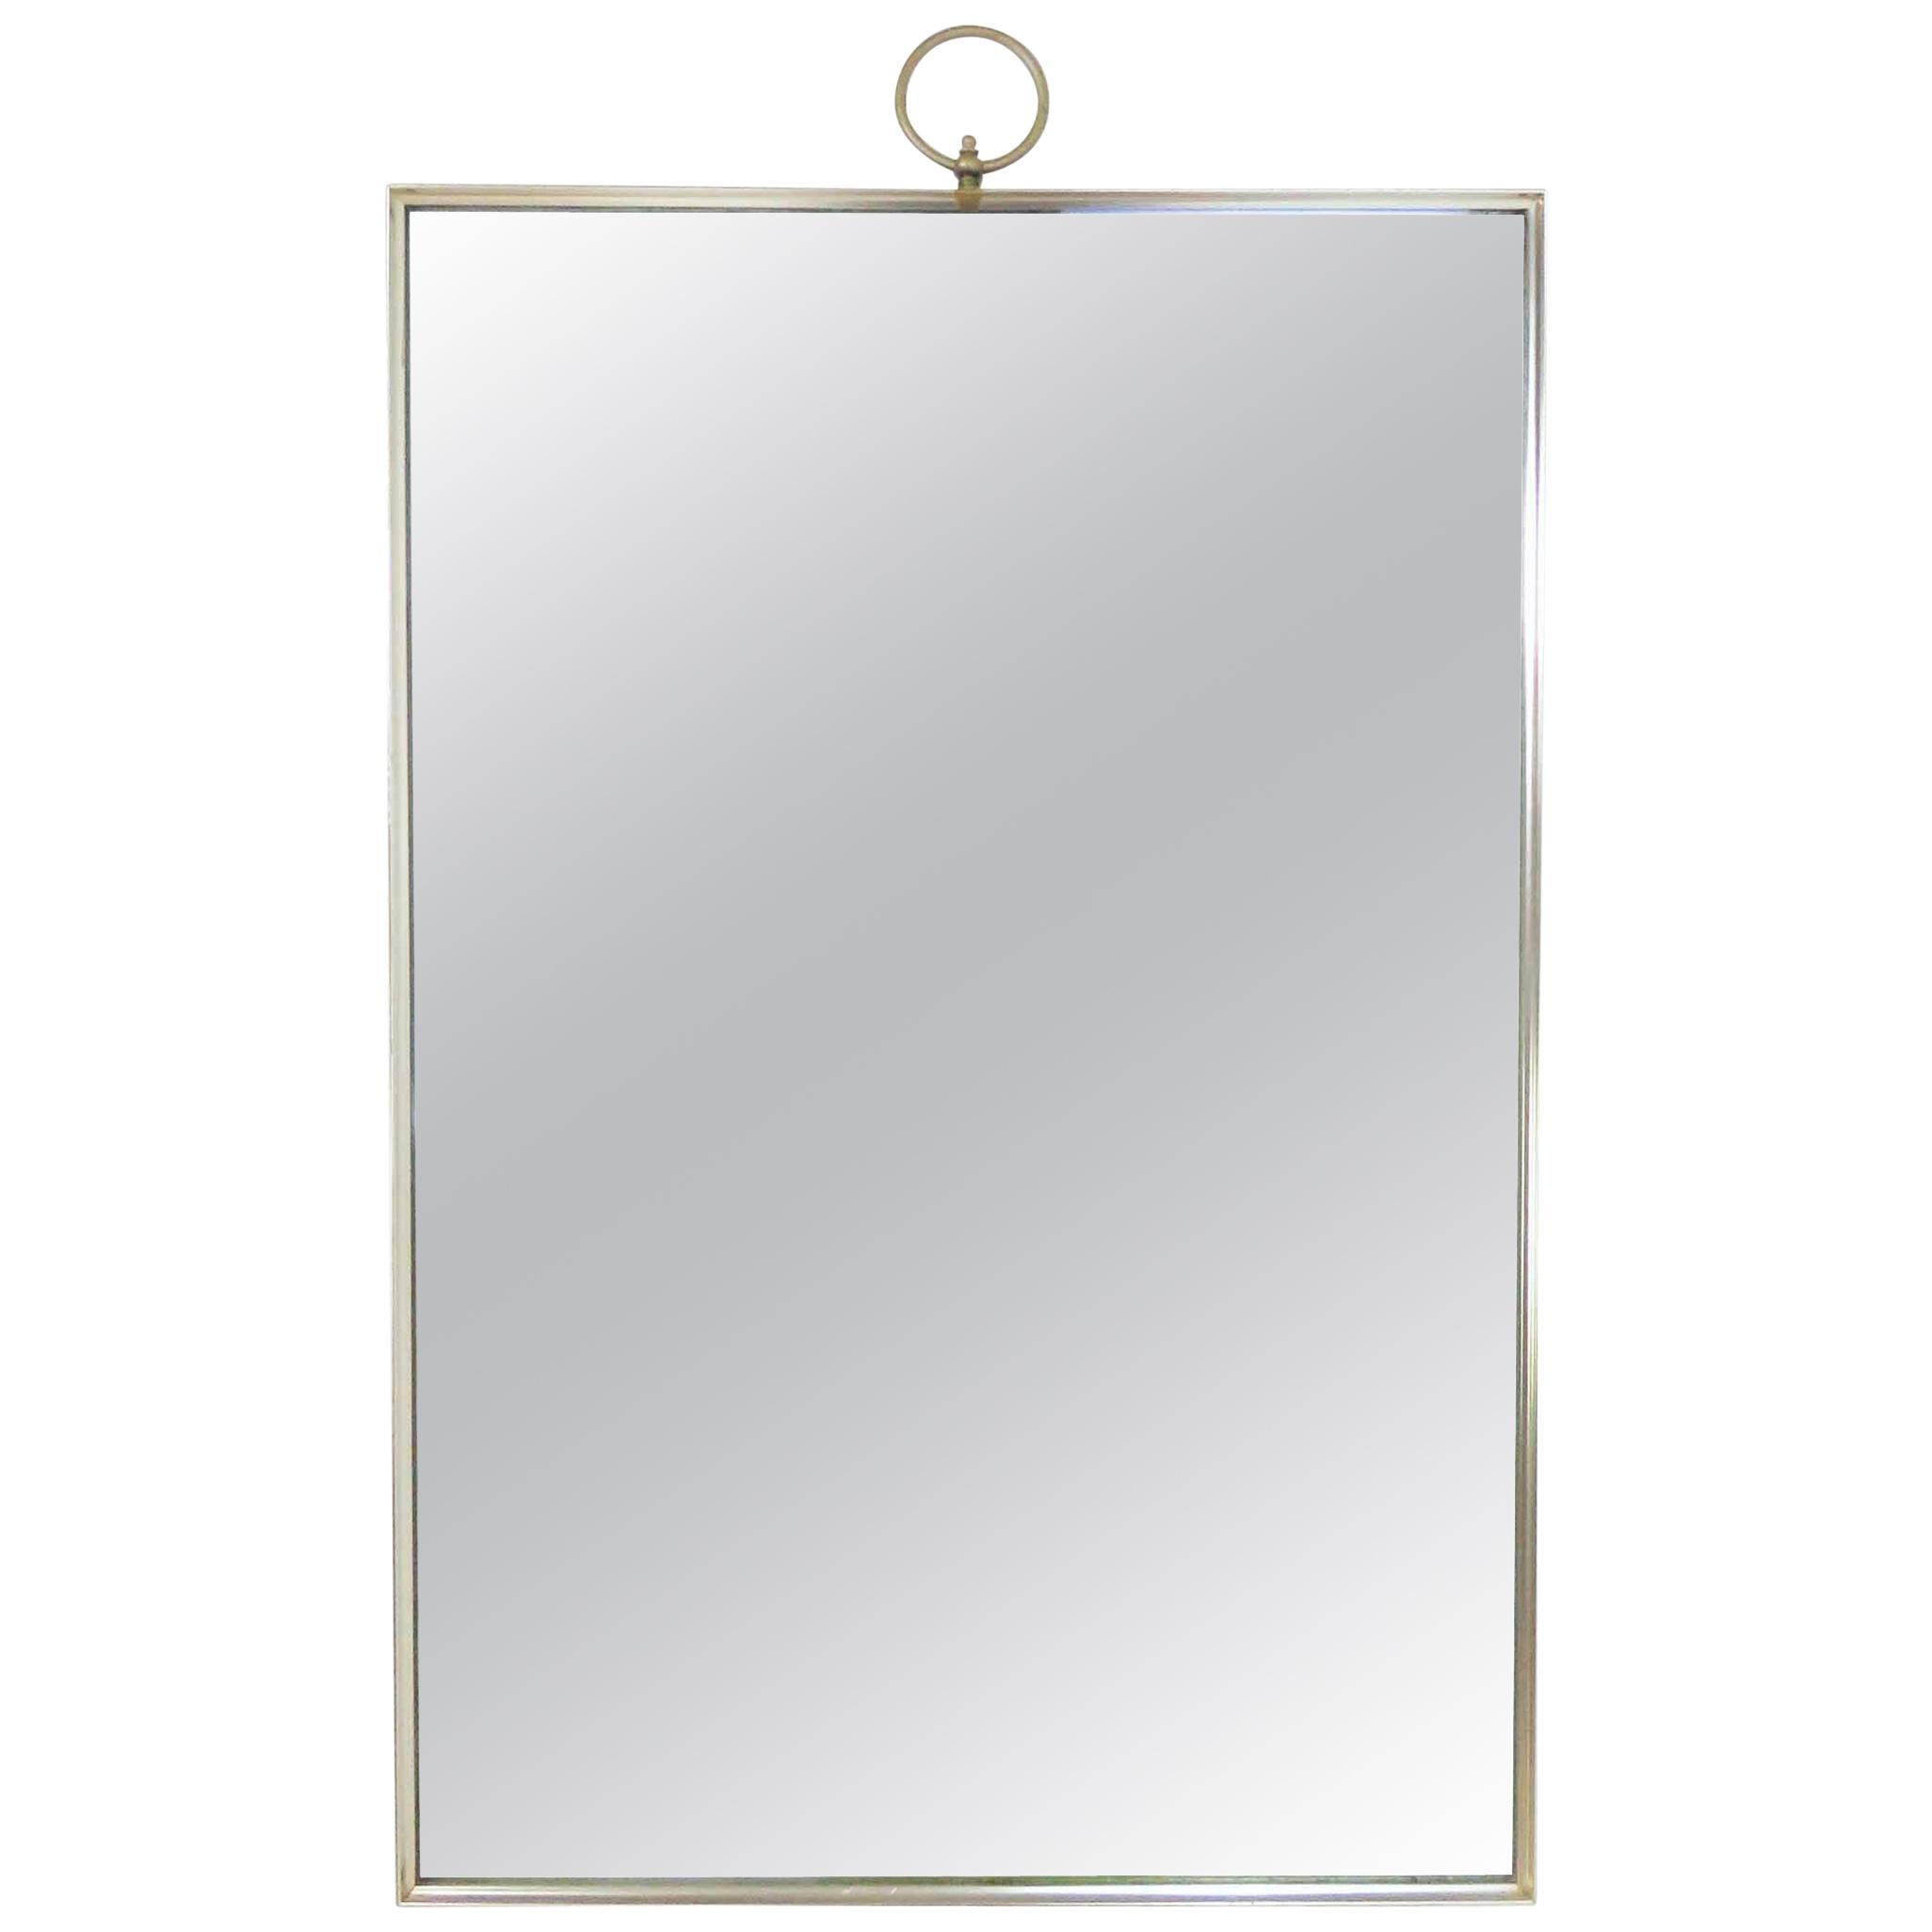 Midcentury Wall Mirror with Ring Finial Accent by Turner, circa 1960s